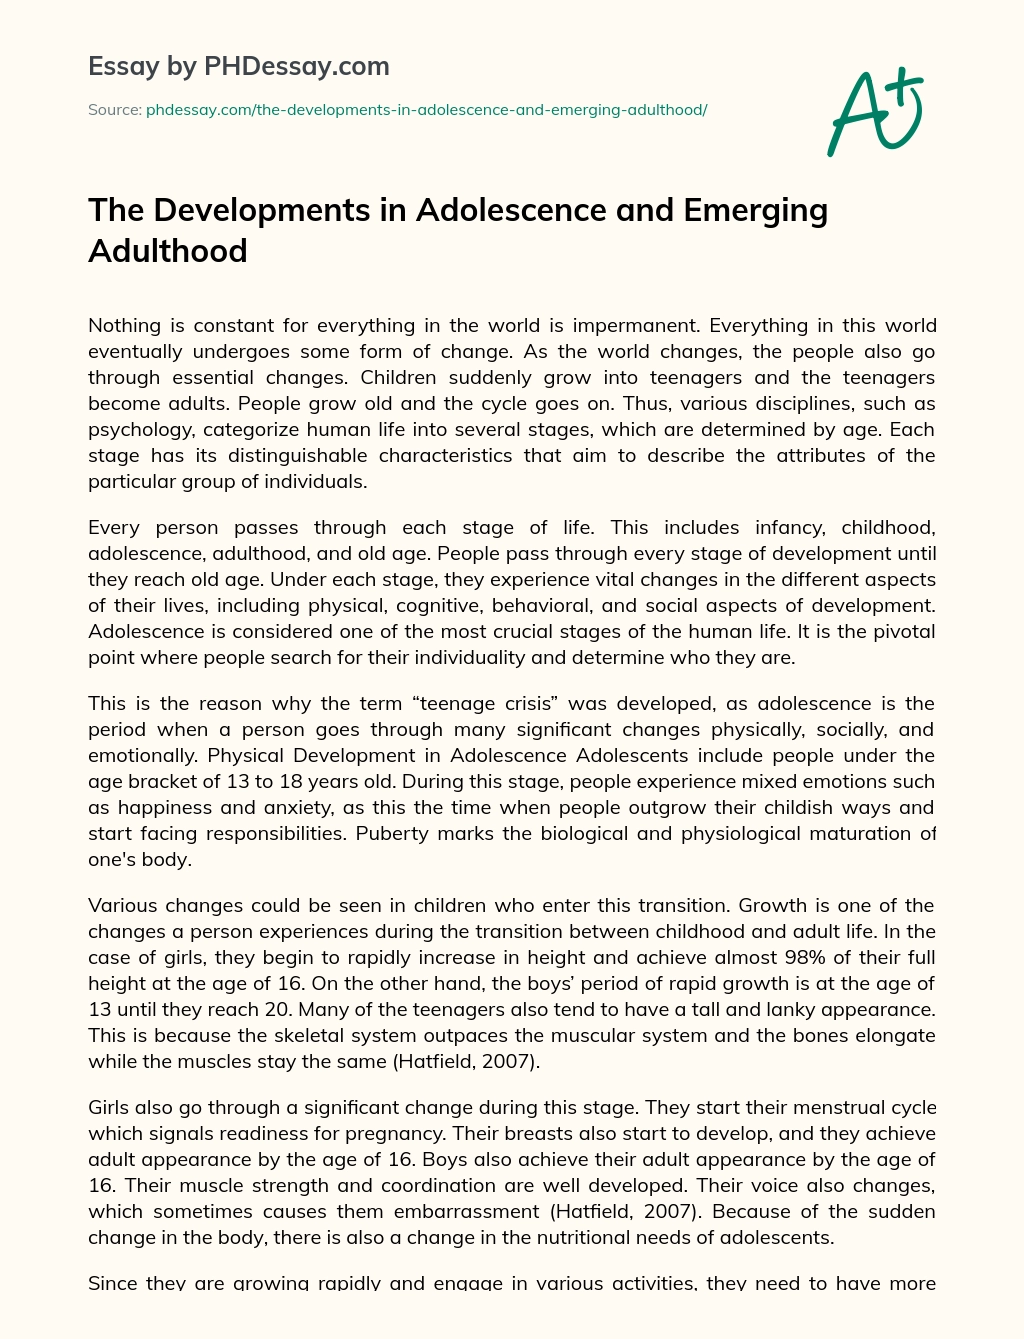 The Developments in Adolescence and Emerging Adulthood essay